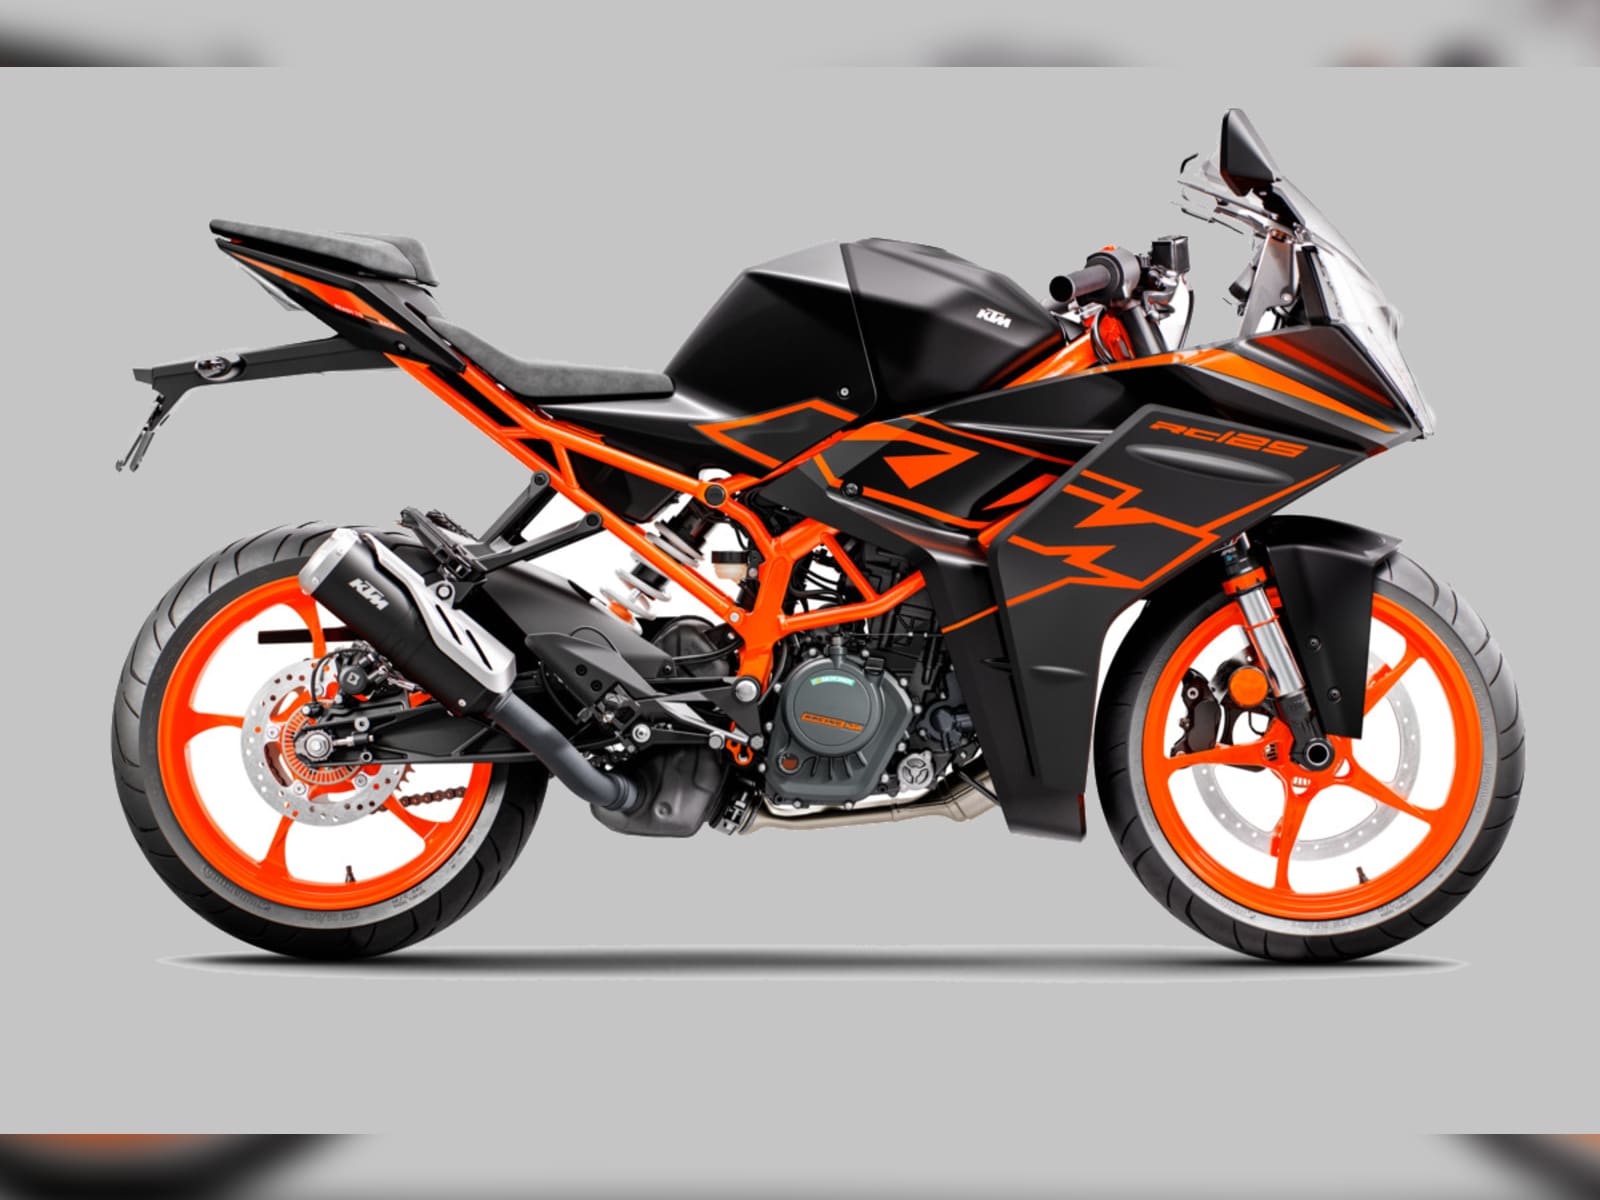 Buy KTM RC 200 Bike Accessories Online at Best Price  Elegant Auto Retail   Indias Largest Online Store For Car and Bike Accessories